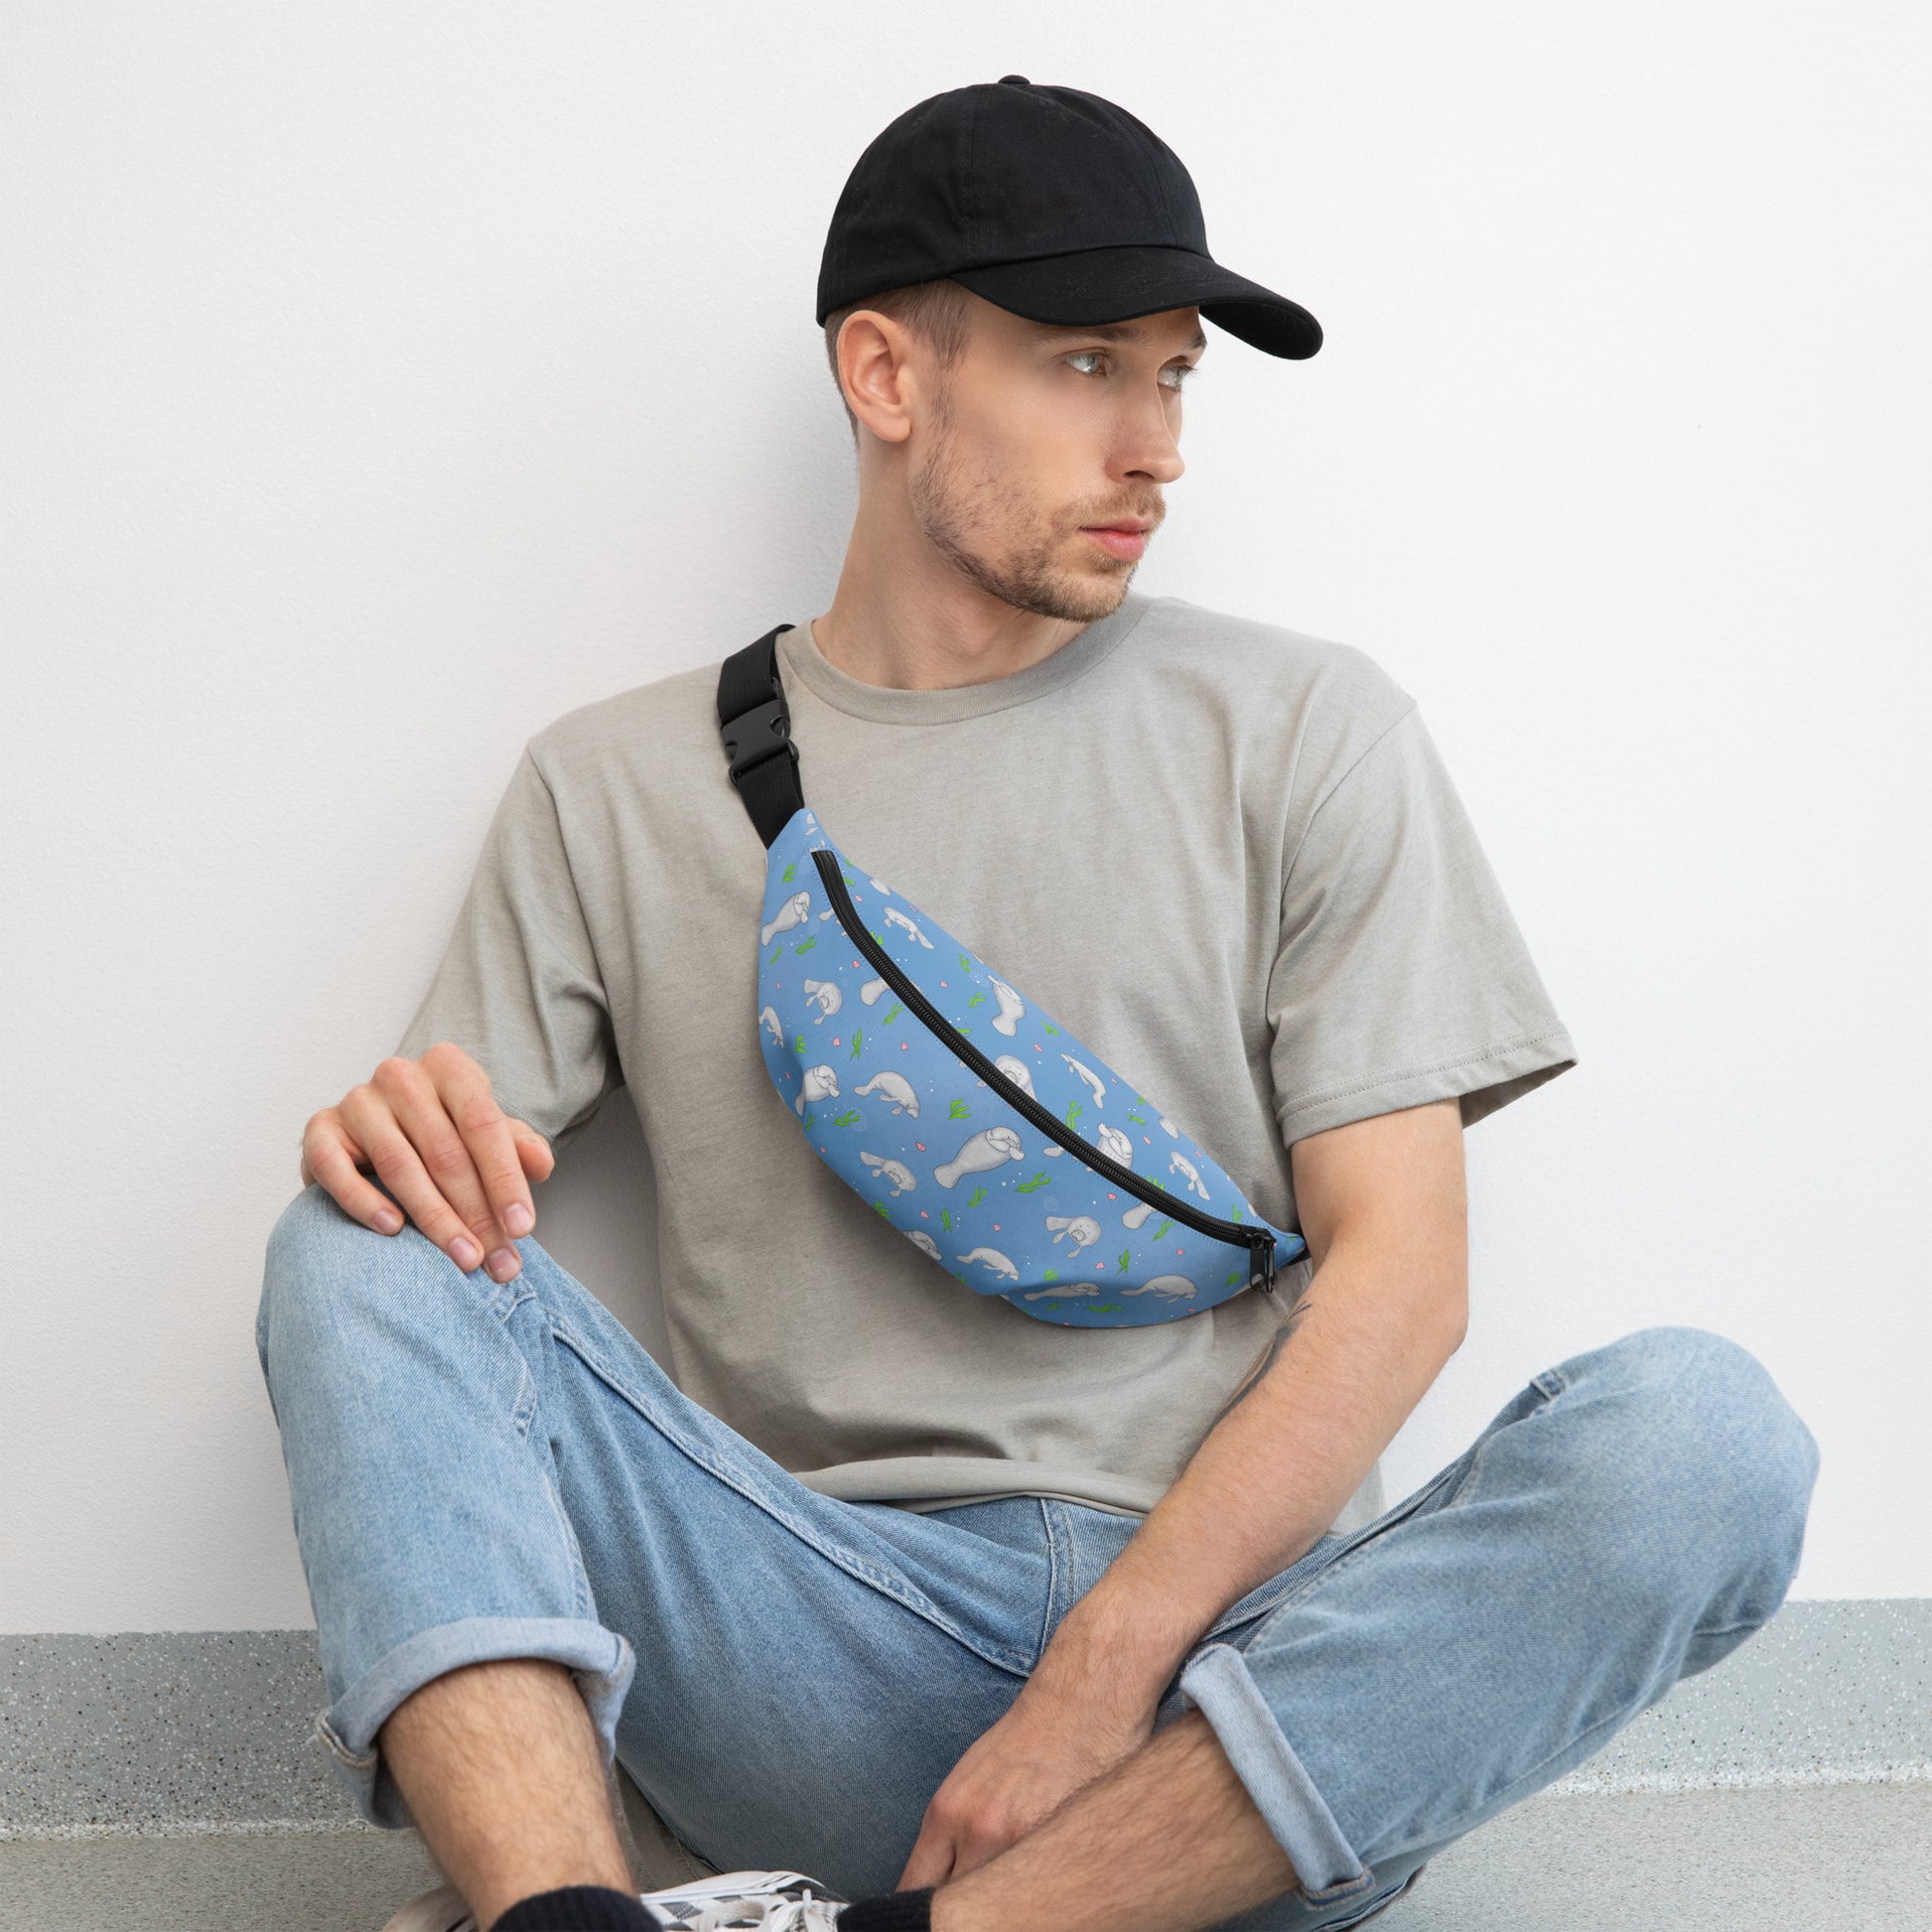 Cute manatee patterned belt bag with adjustable straps, zippered pouch, and small inner pocket. Male model wearing bag across his chest while sitting on the floor.